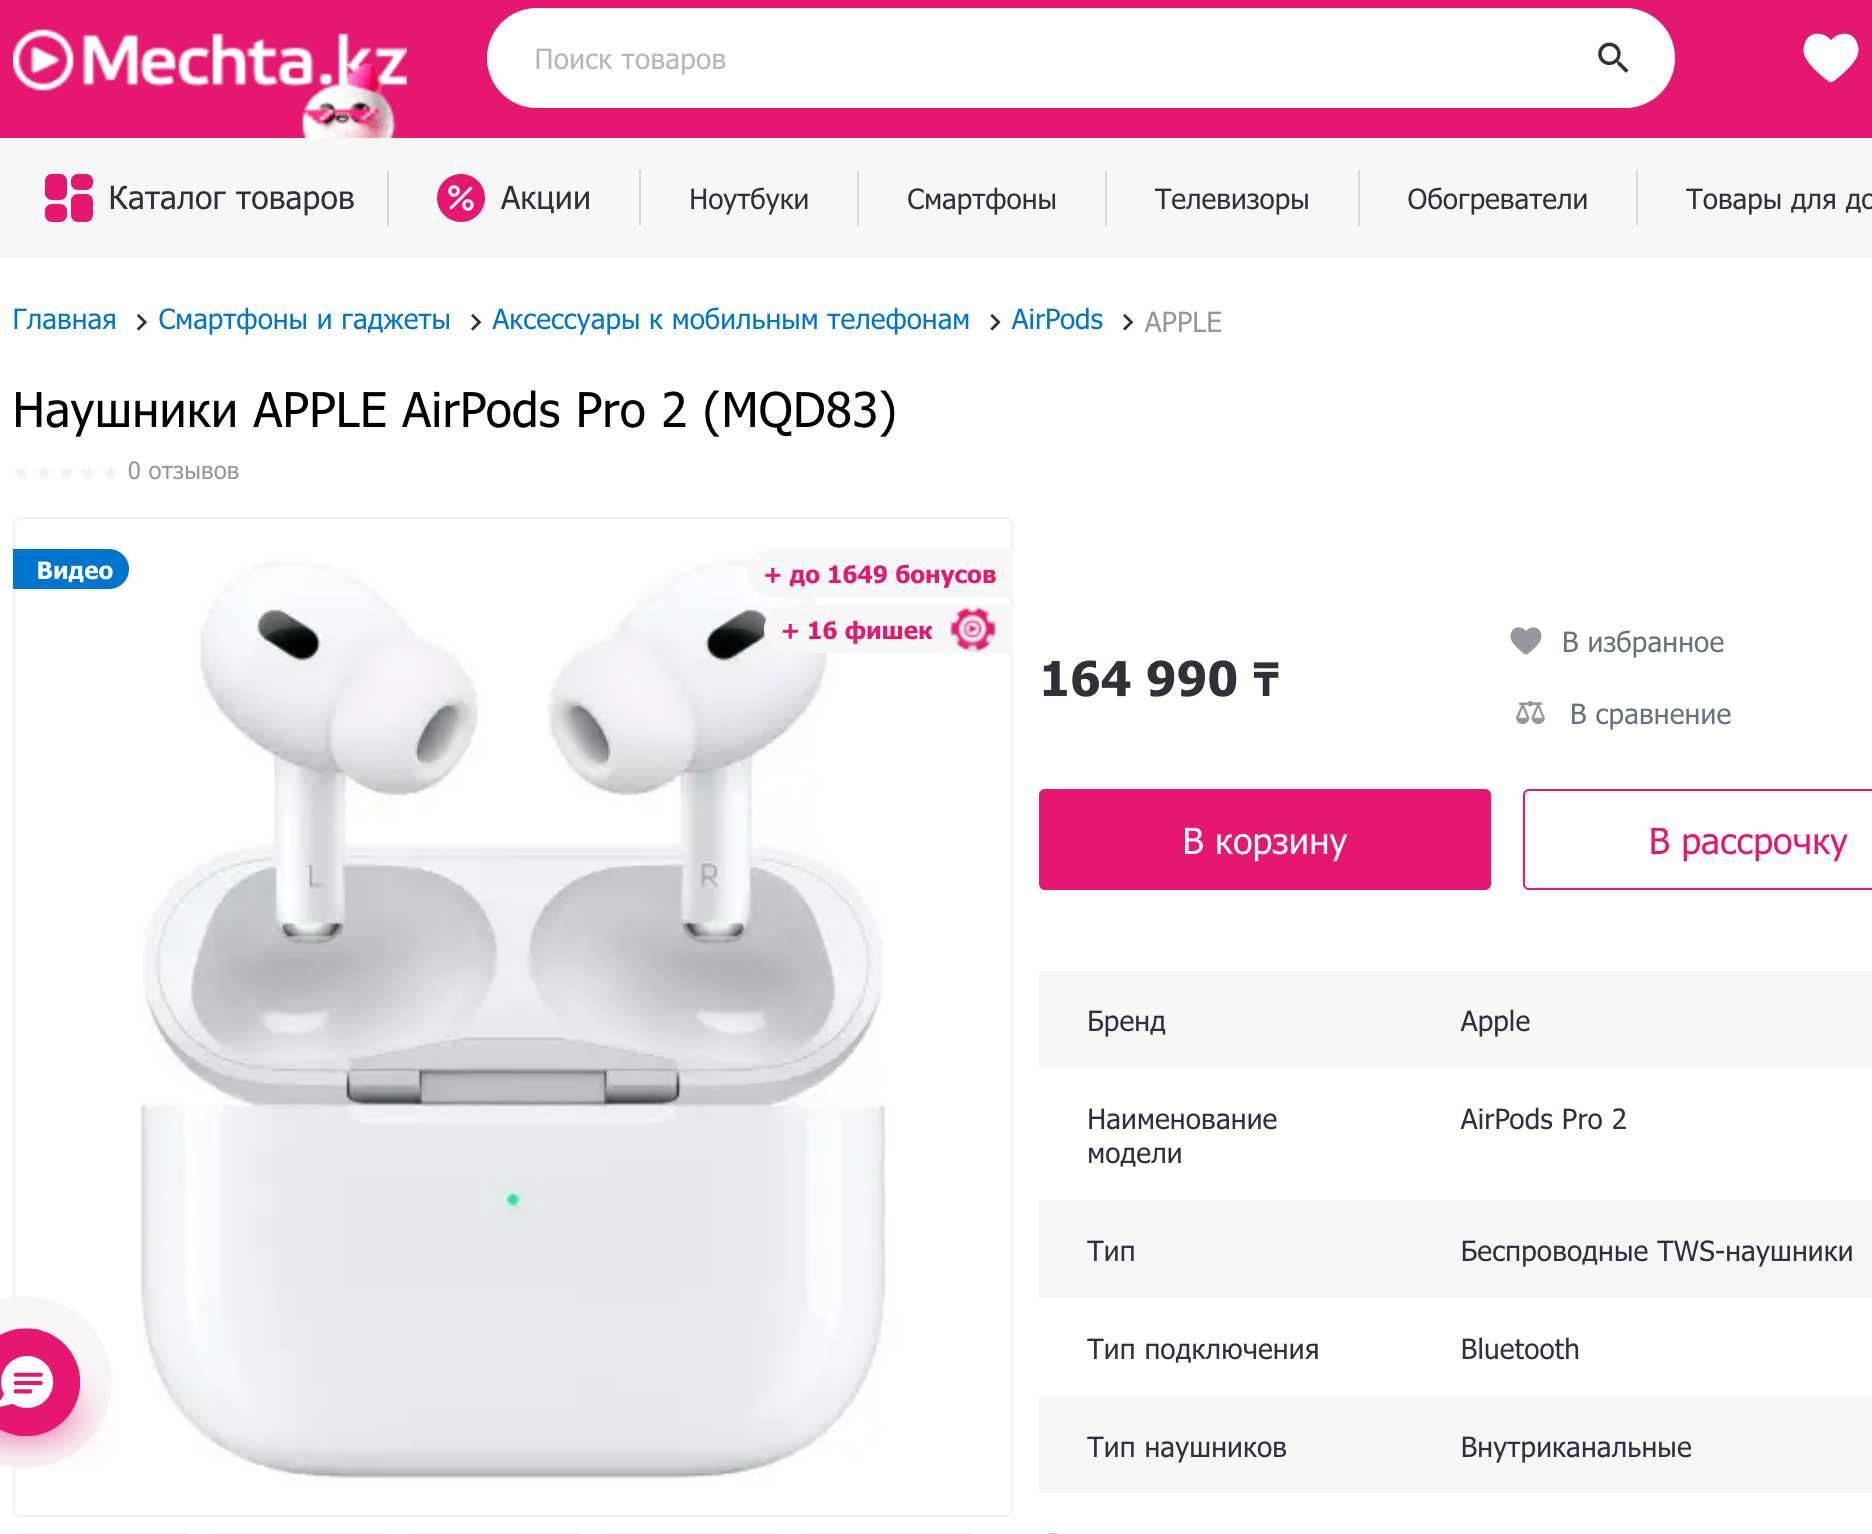 наушники Apple AirPods Max, AirPods Pro 2 Sony WH-1000XM4